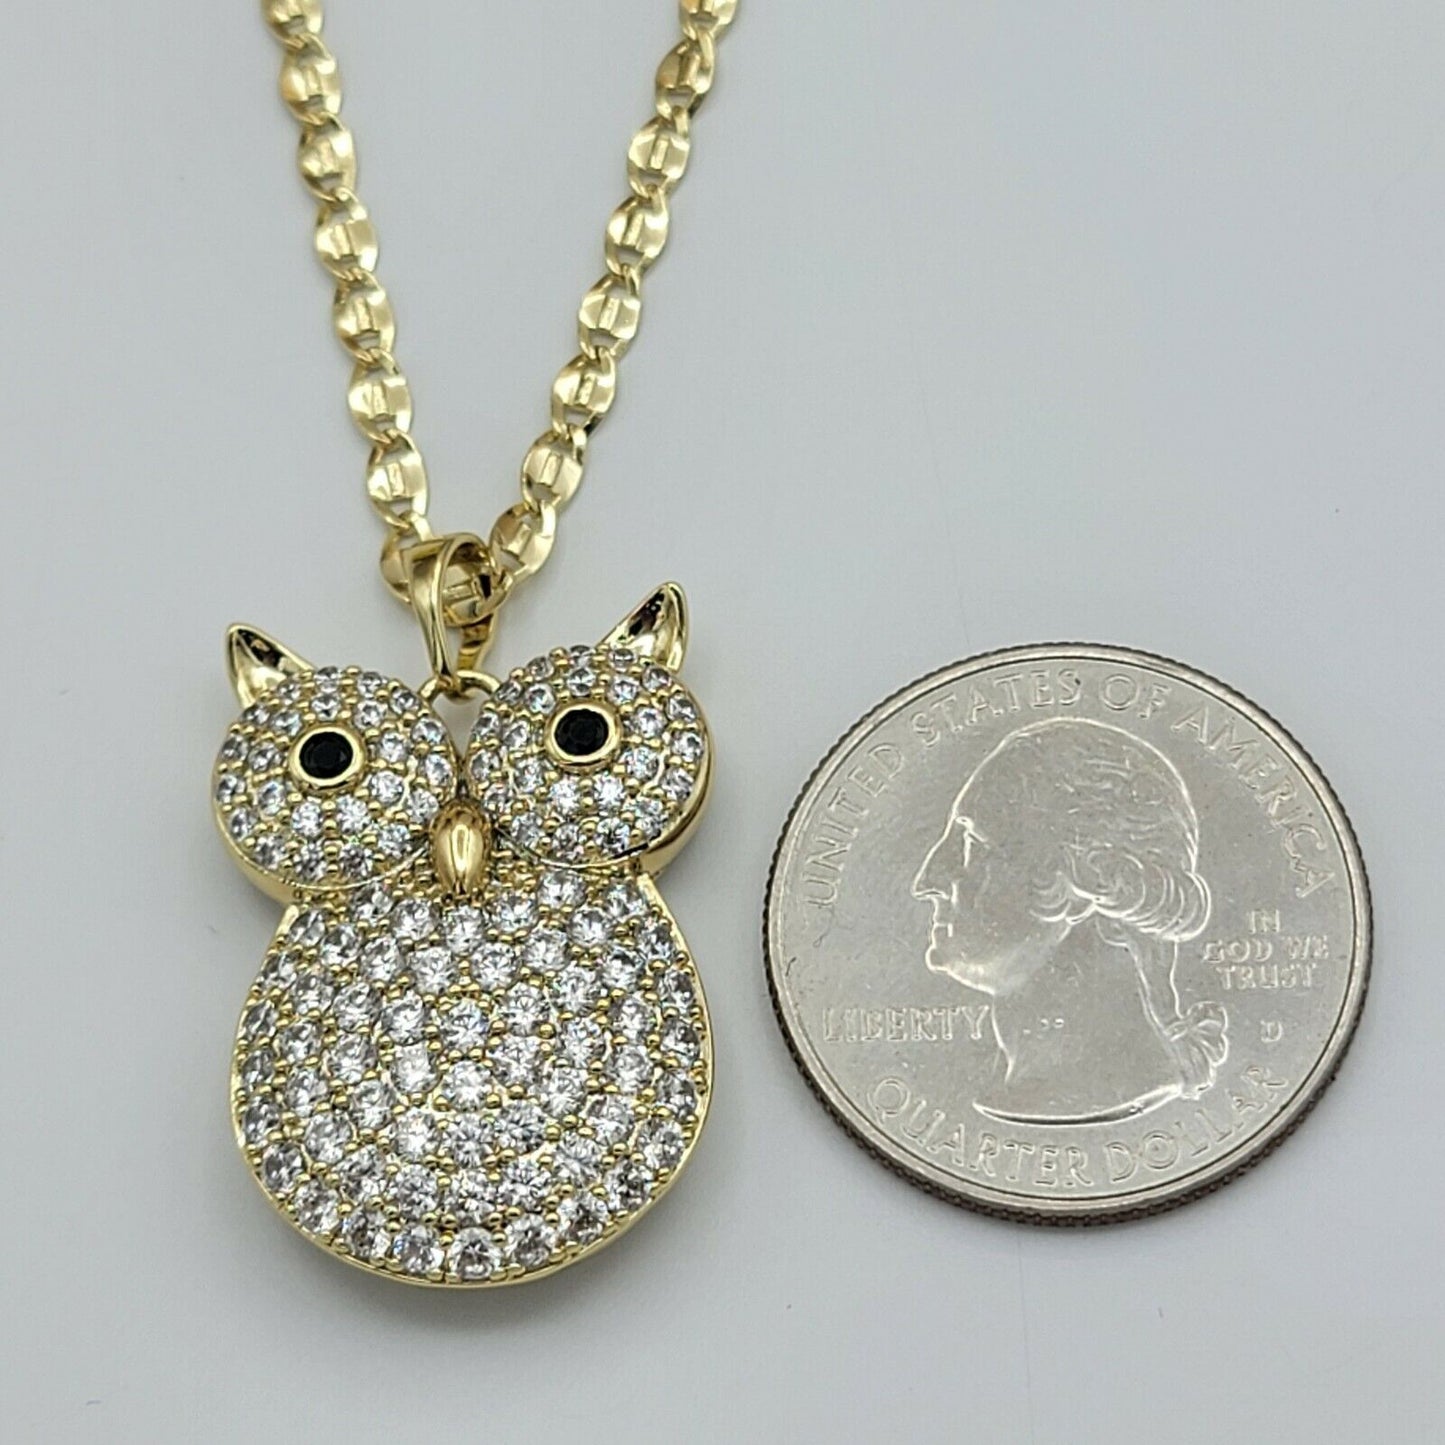 Necklaces - 14k Gold Plated. CZ Icy Owl Pendant & Chain.